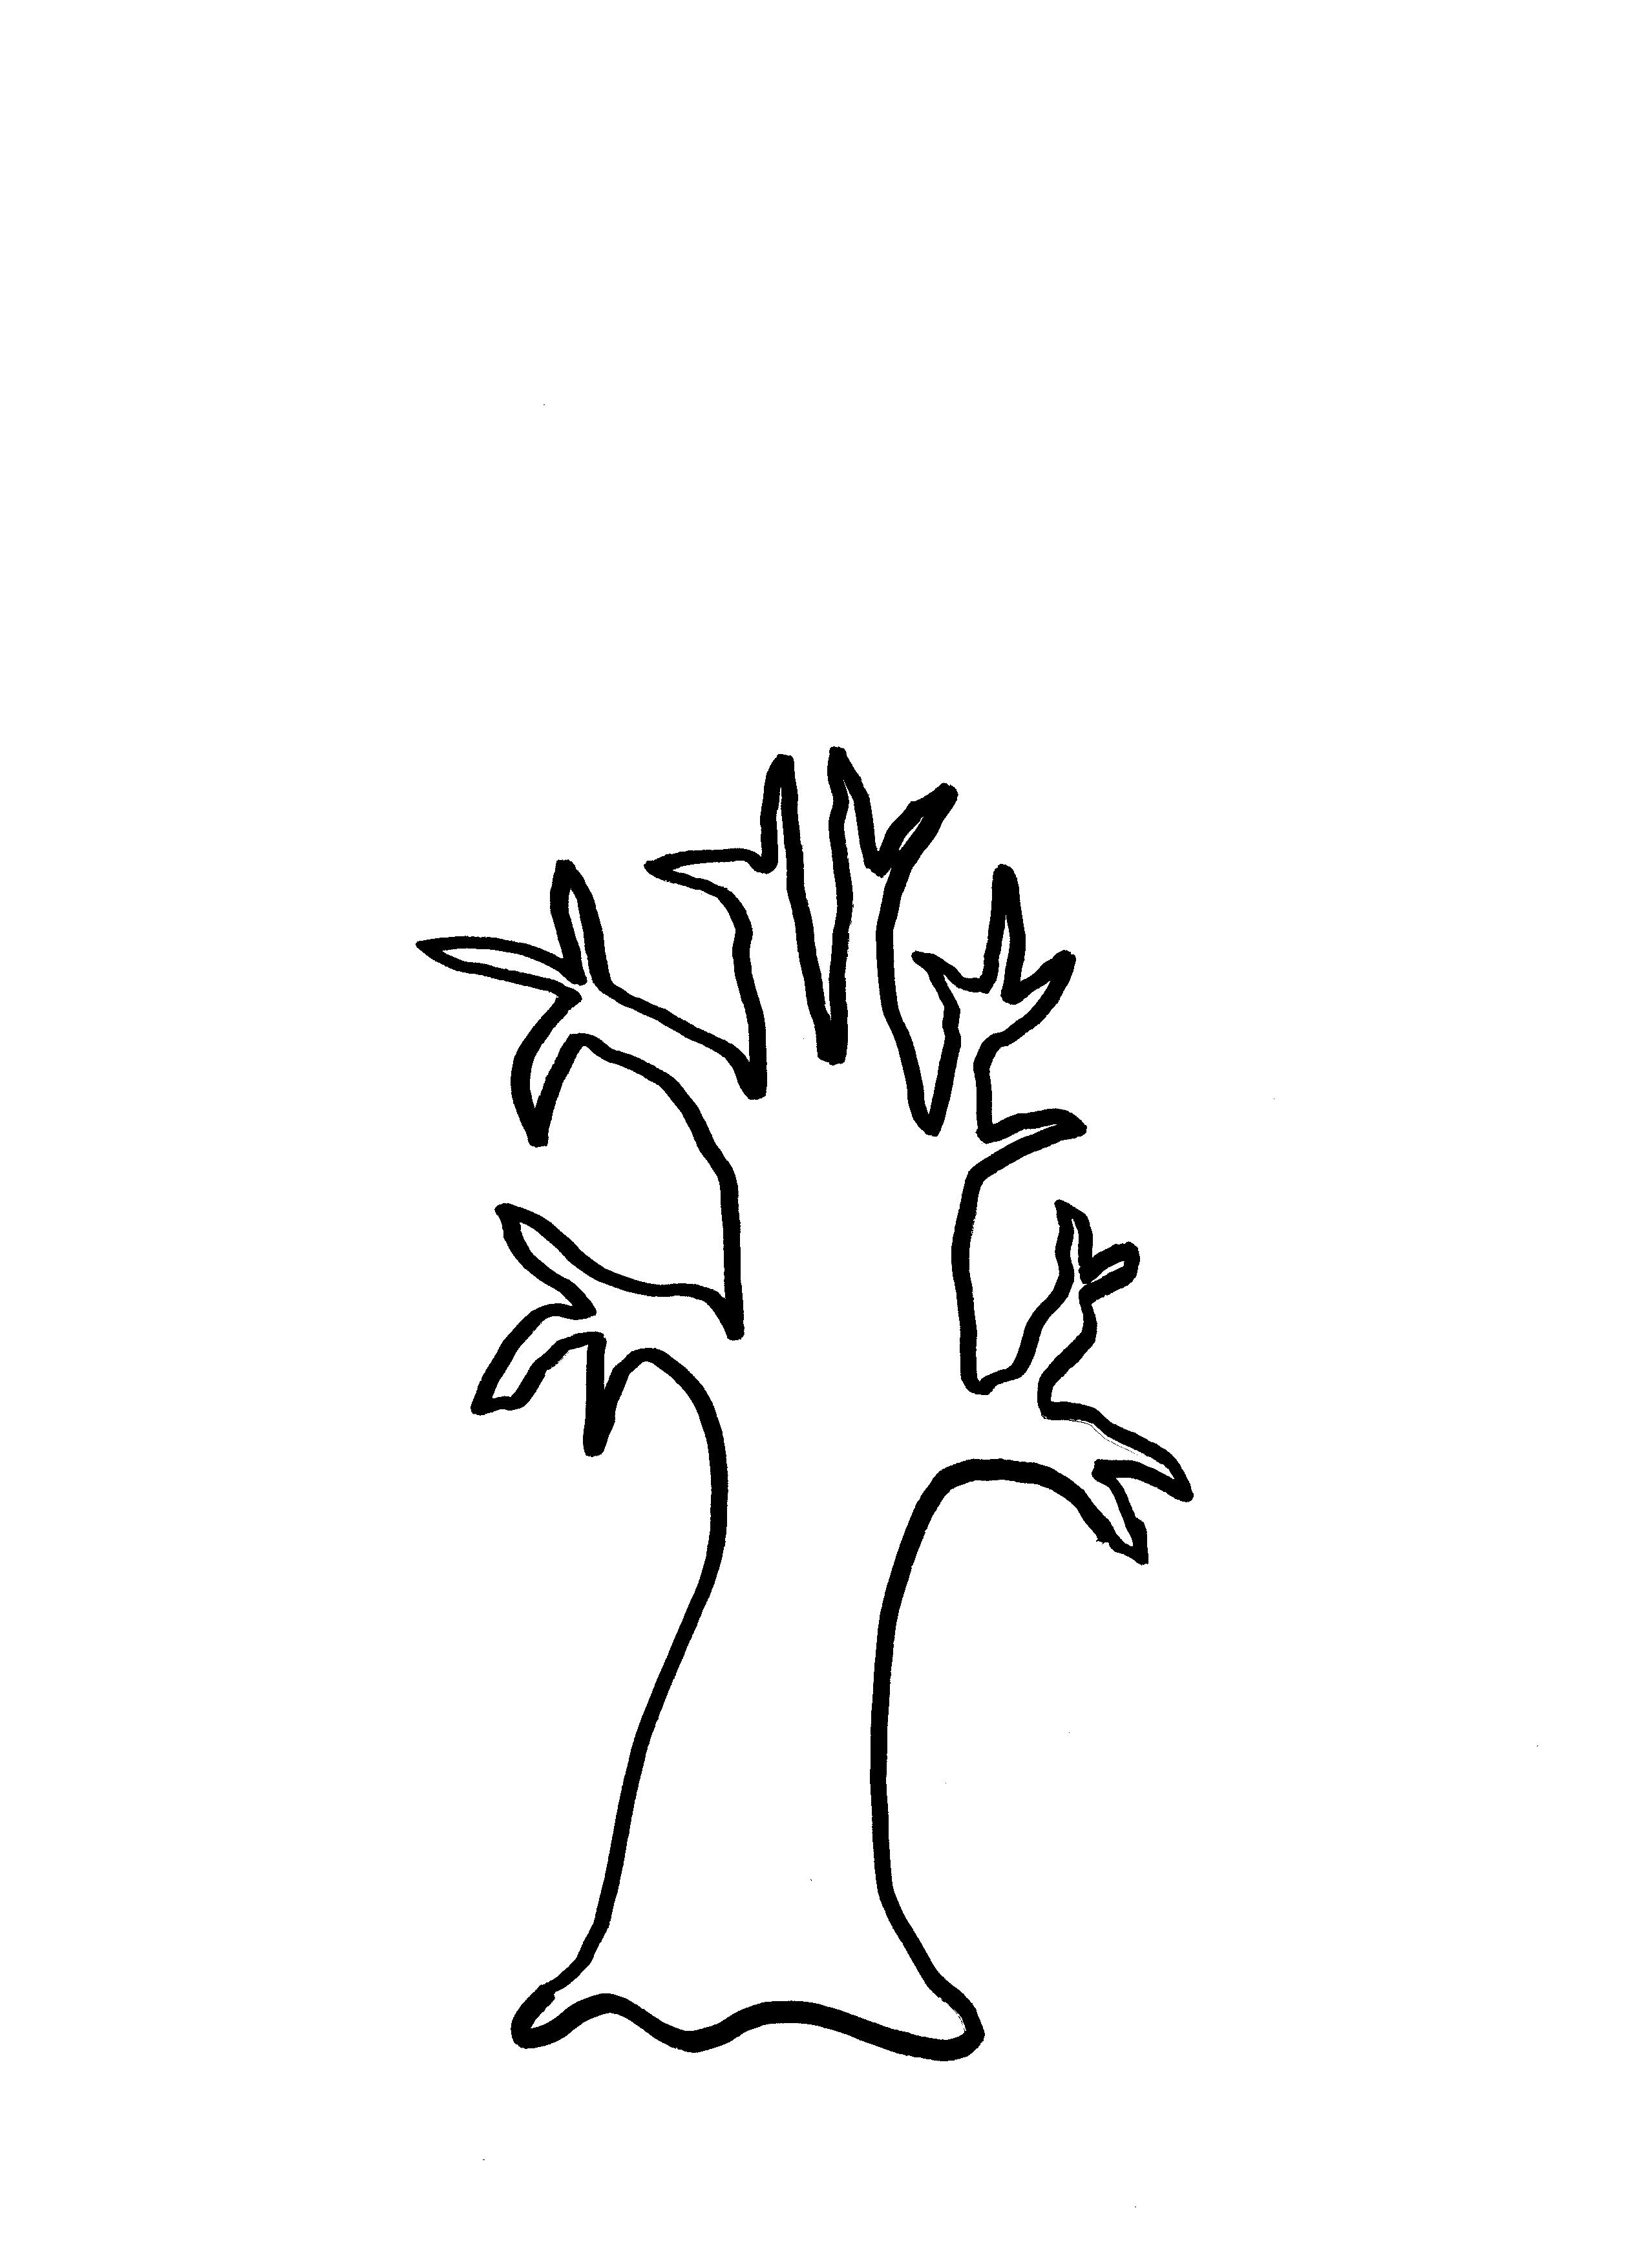 Tree Trunk Printable - Clipart library